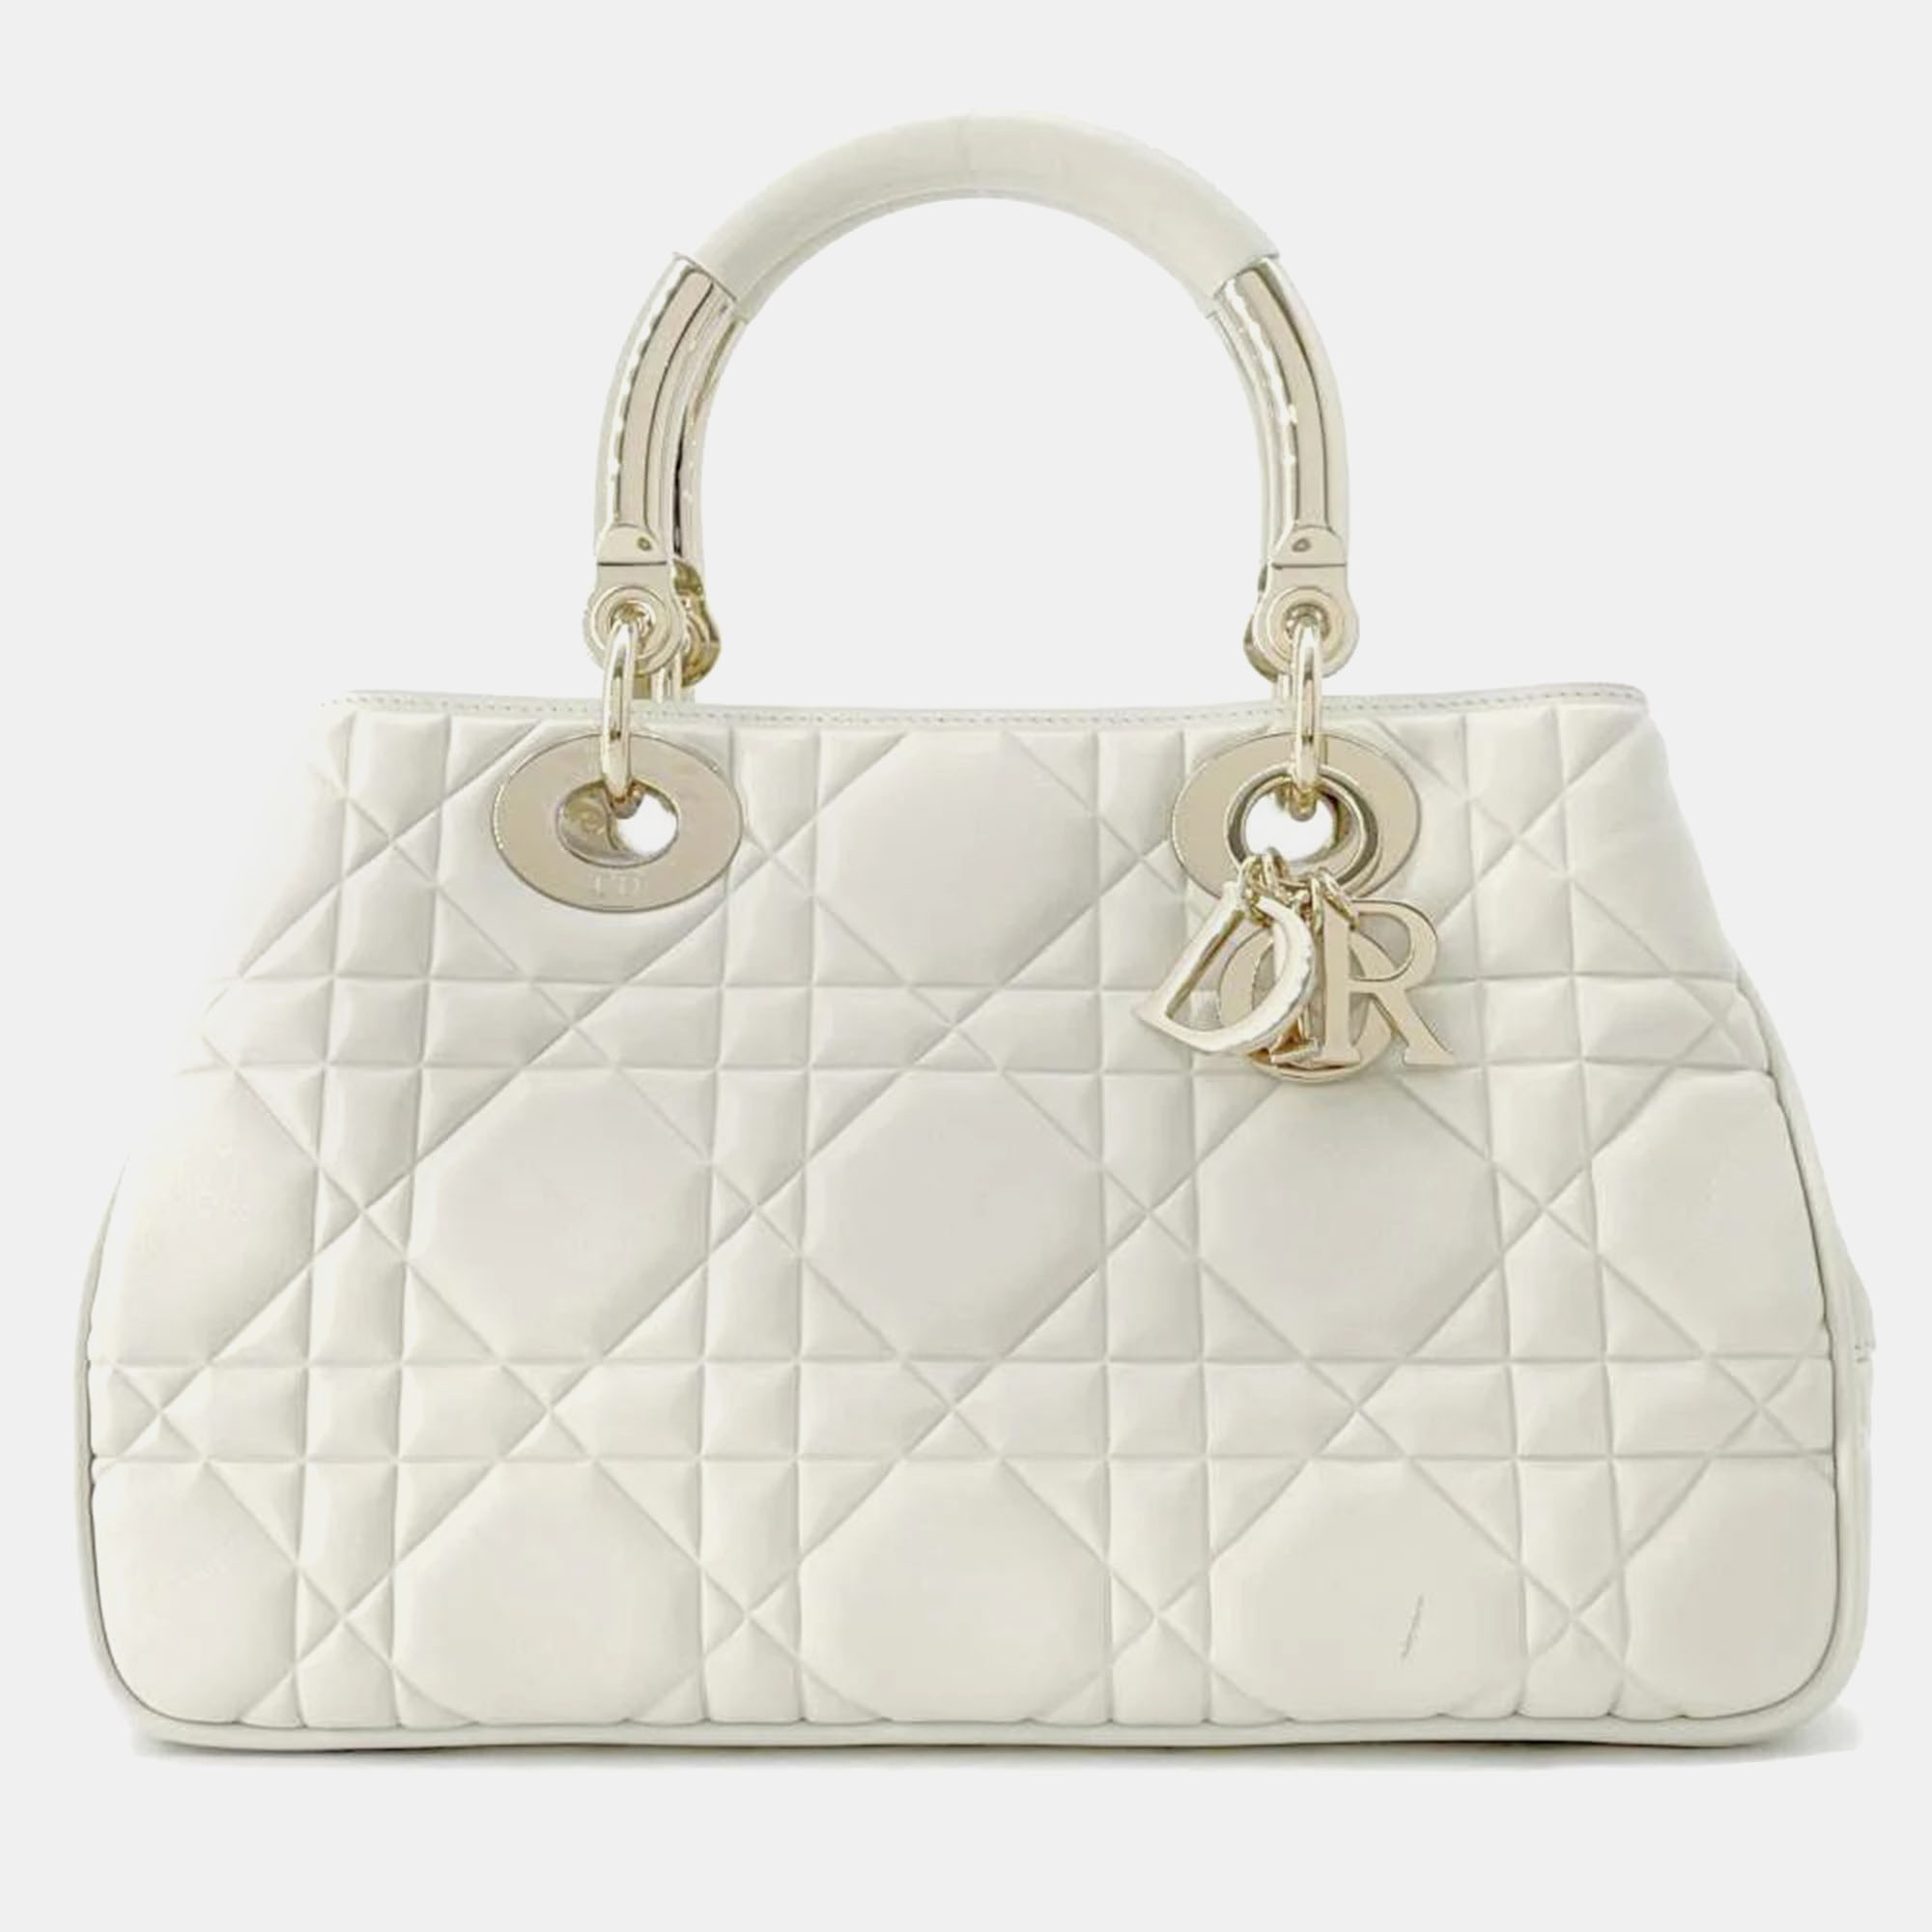 Dior white leather medium the lady 95.22 top handle bag